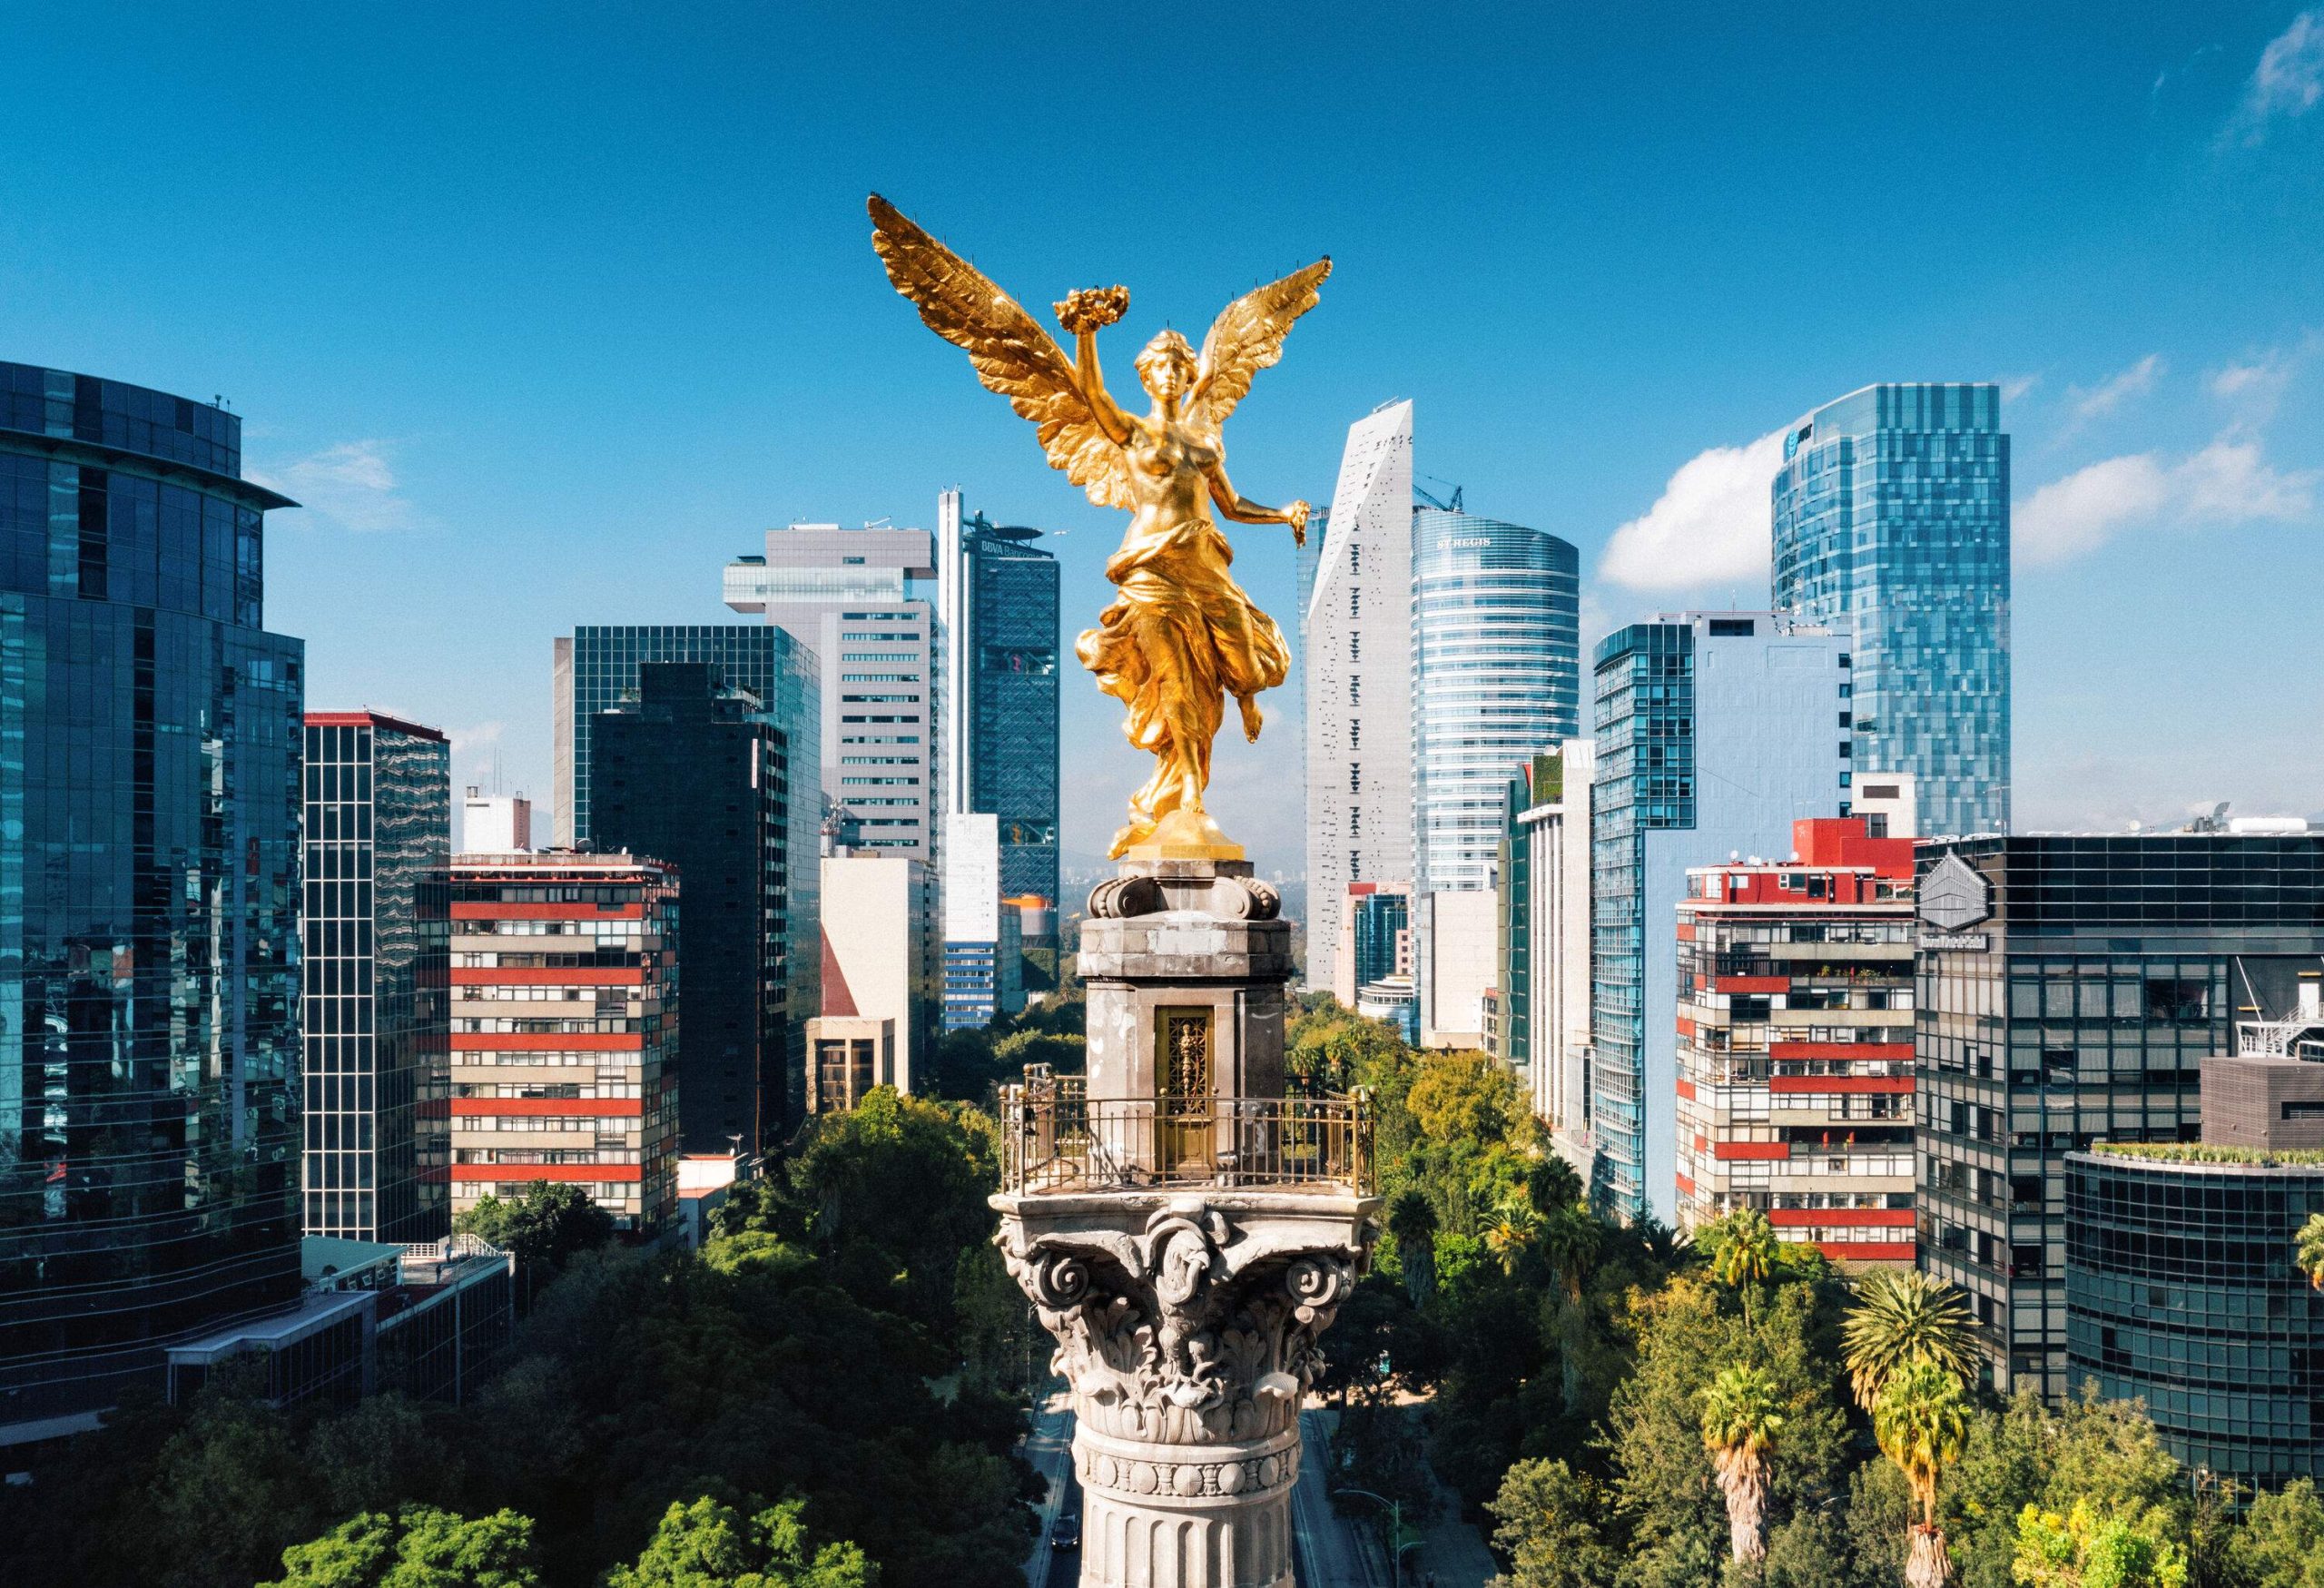 A golden statue of an angel perched on a Corinthian column, surrounded by the tall structures of the city.